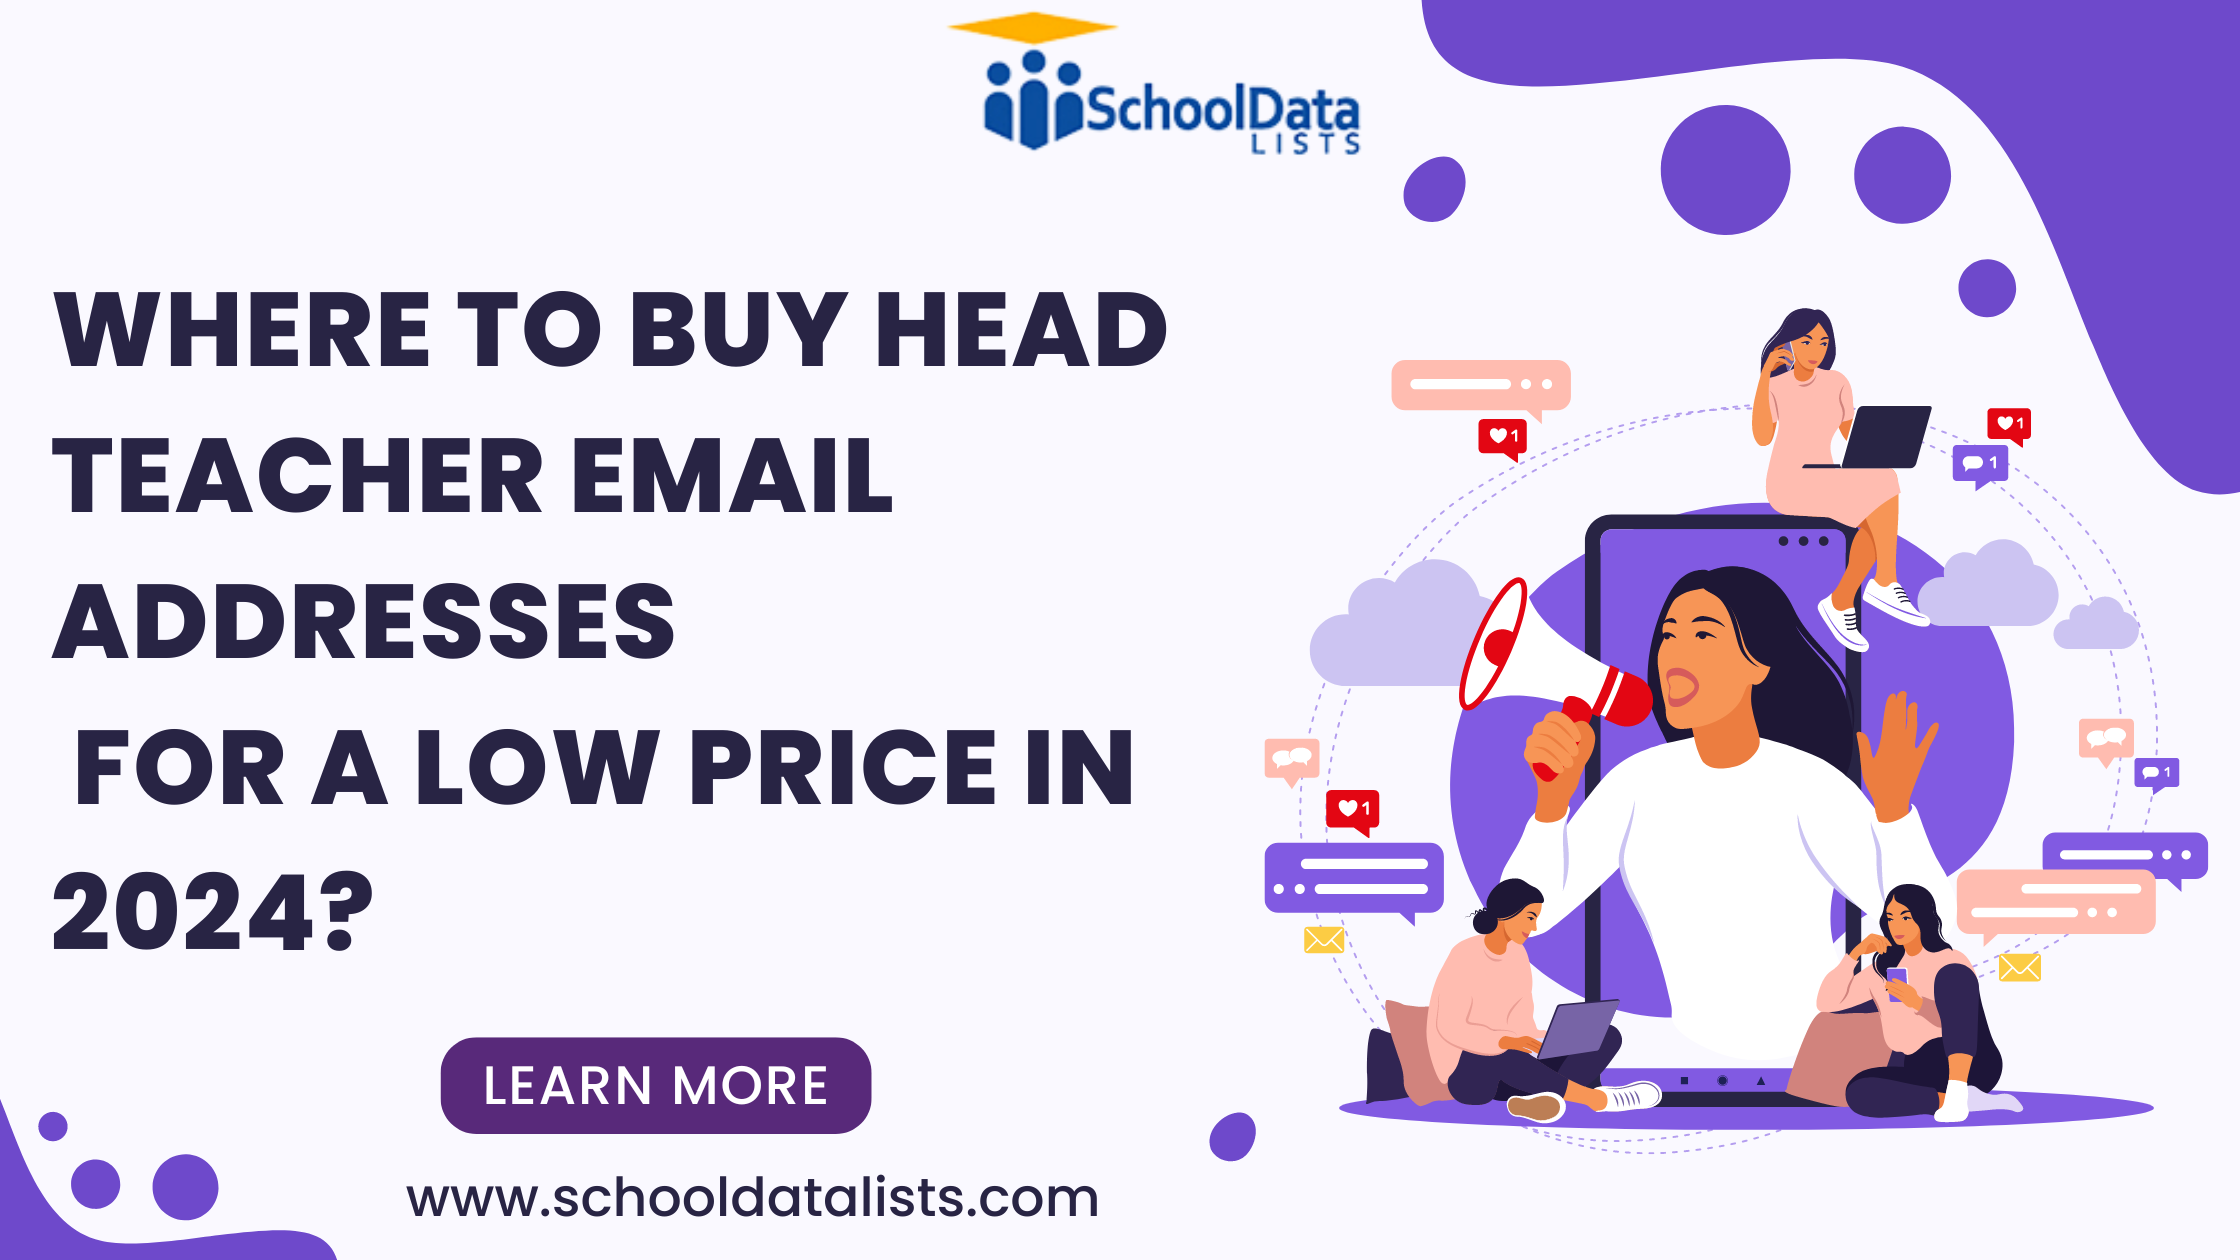 Where to Buy Head Teacher Email Addresses for a Low Price in 2024?